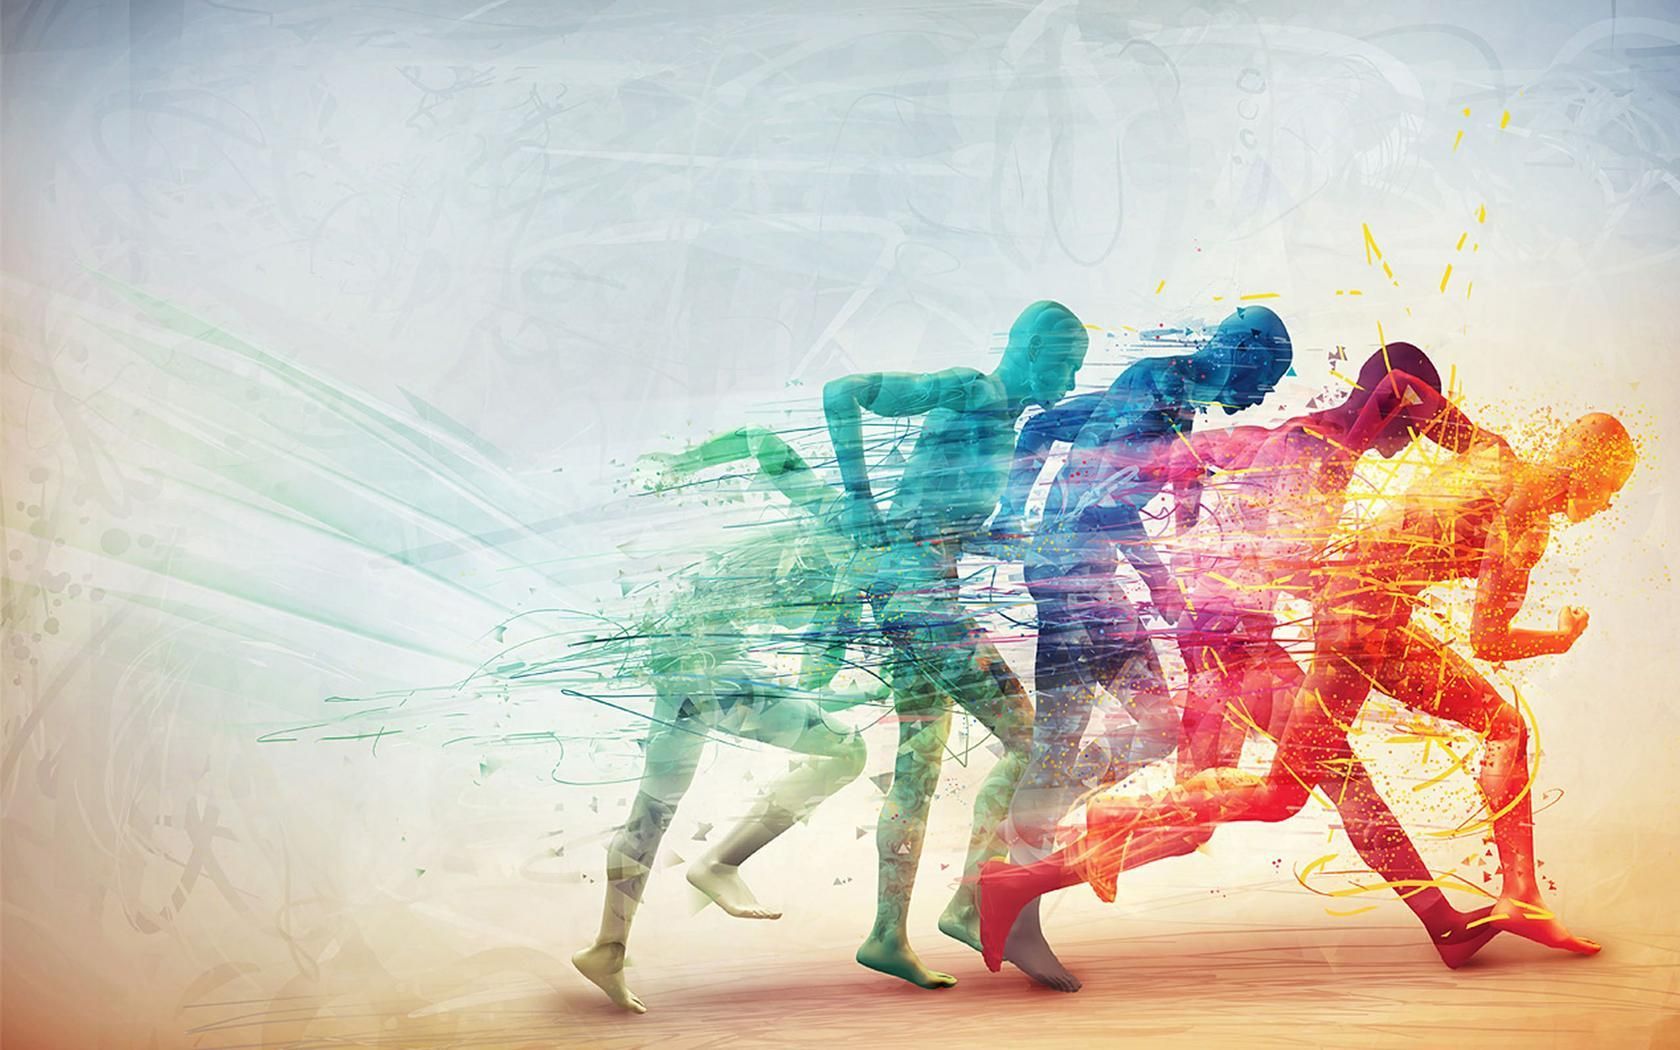 Awesome Physical Education Background. Running art, Running, Sports wallpaper